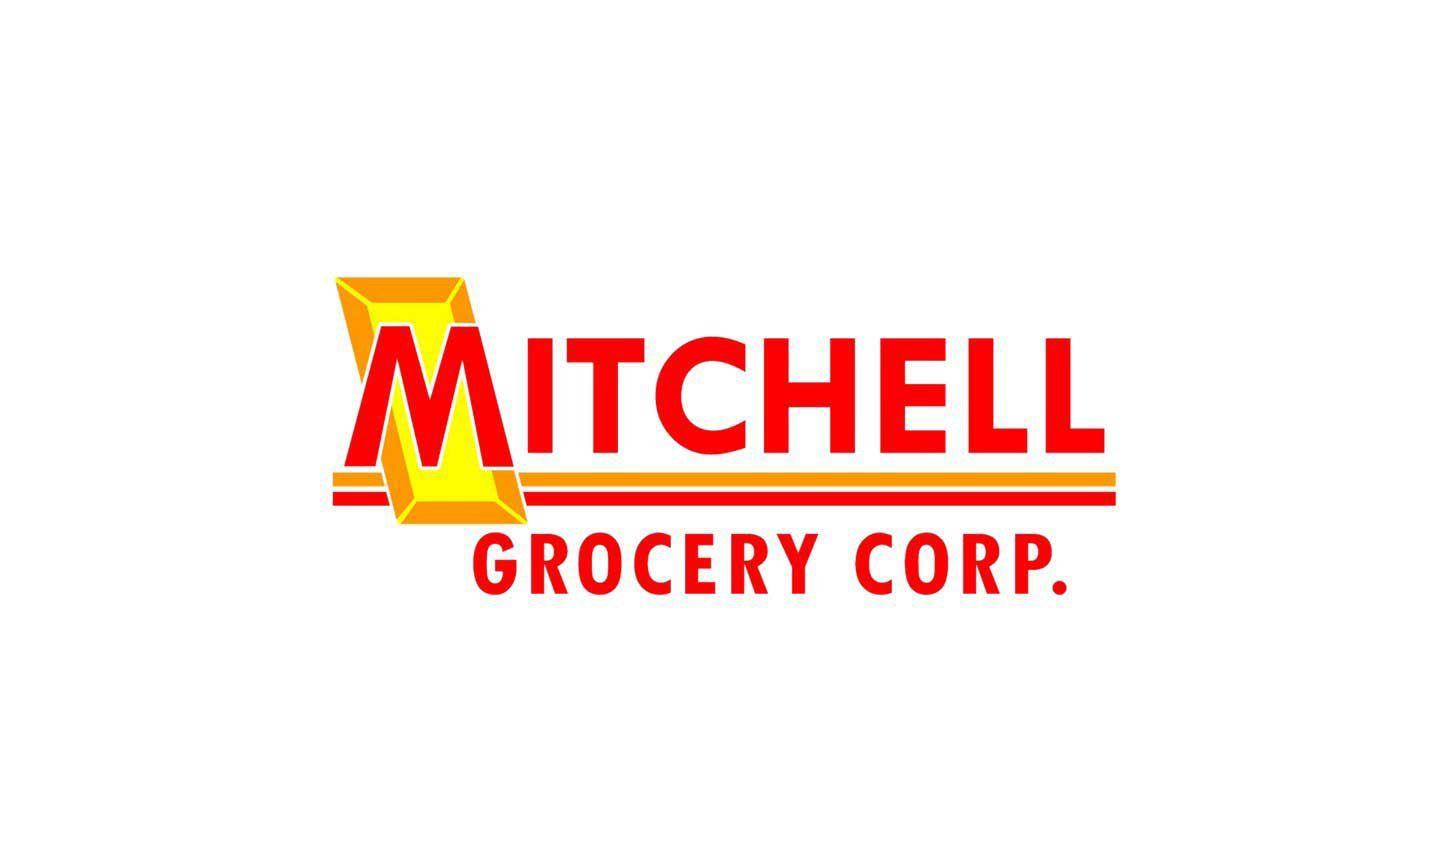 Ace Hardware Logo - Mitchell Grocery Expands Its GM Program With Ace Hardware Partnership